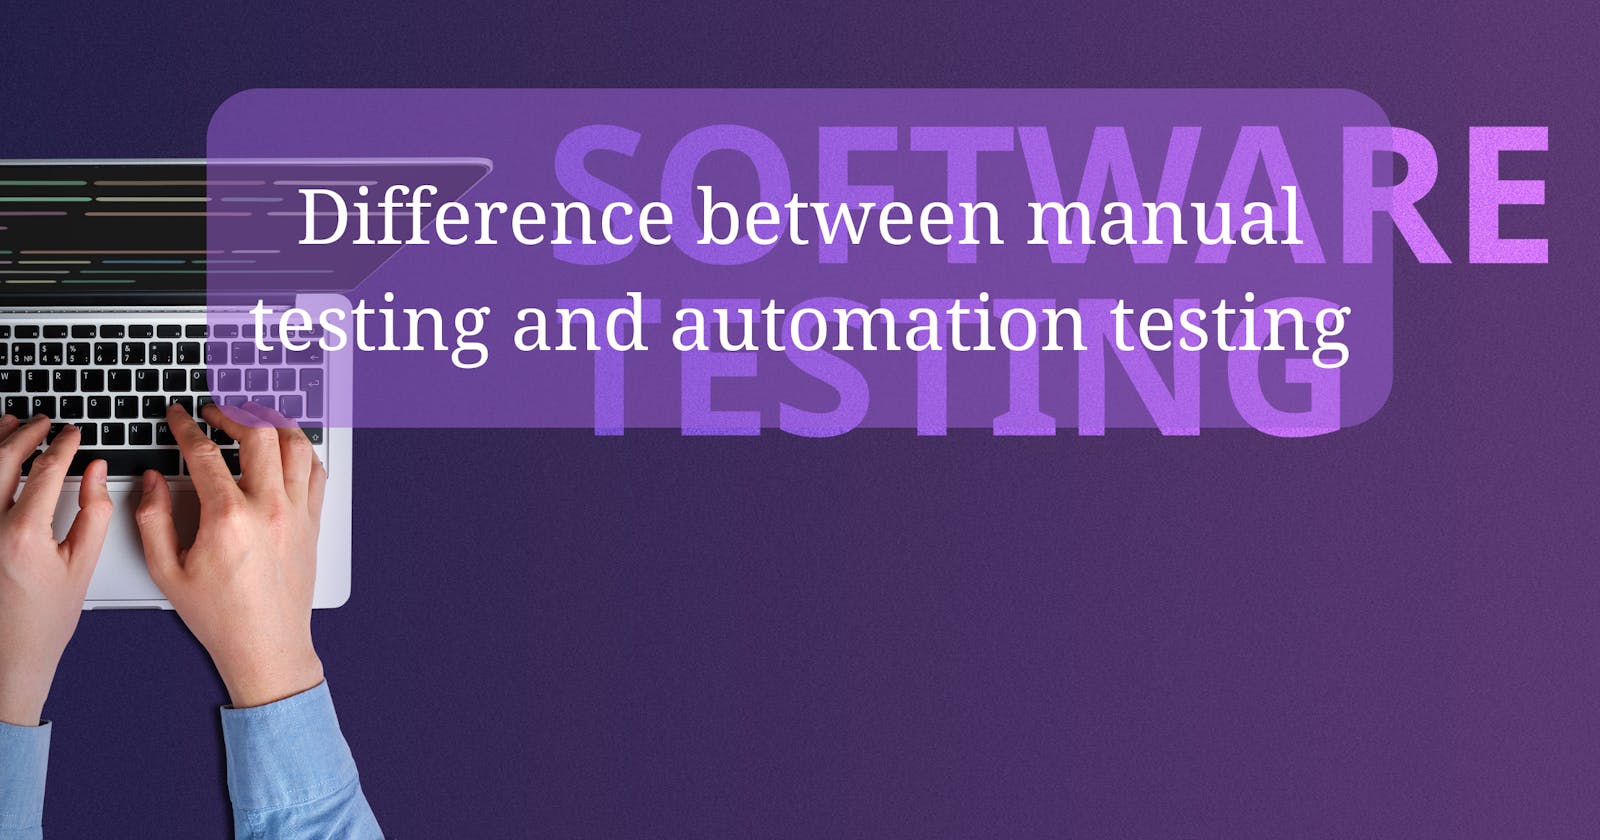 Difference between manual testing and automation testing